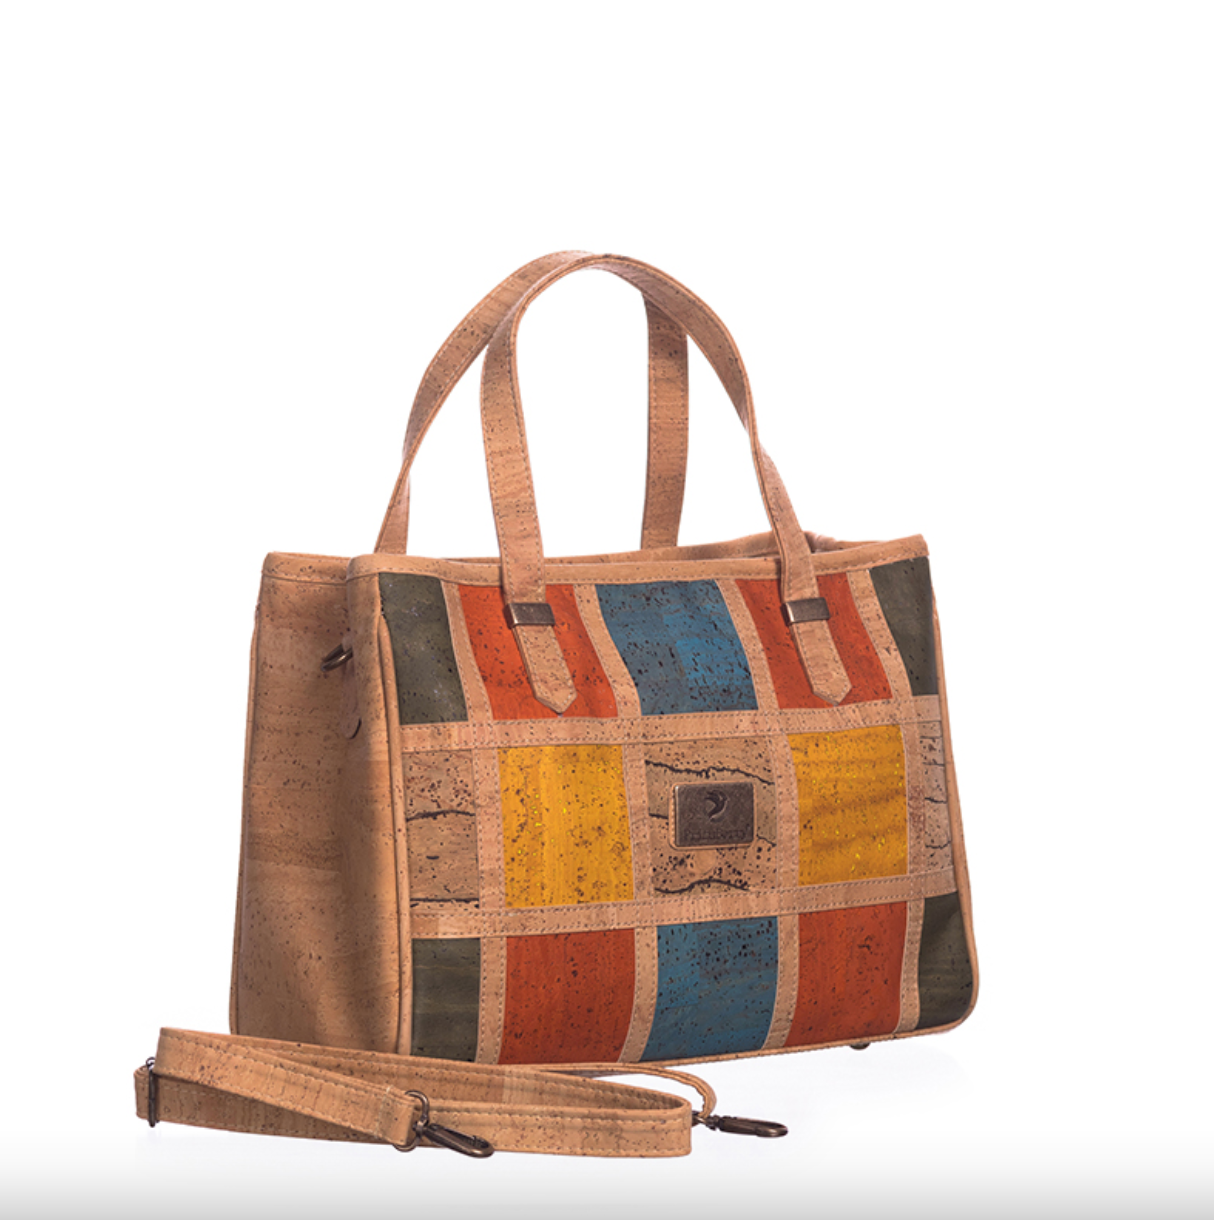 Ethical Cork Handbag Perfect for Casual and Formal Occasions Diversity